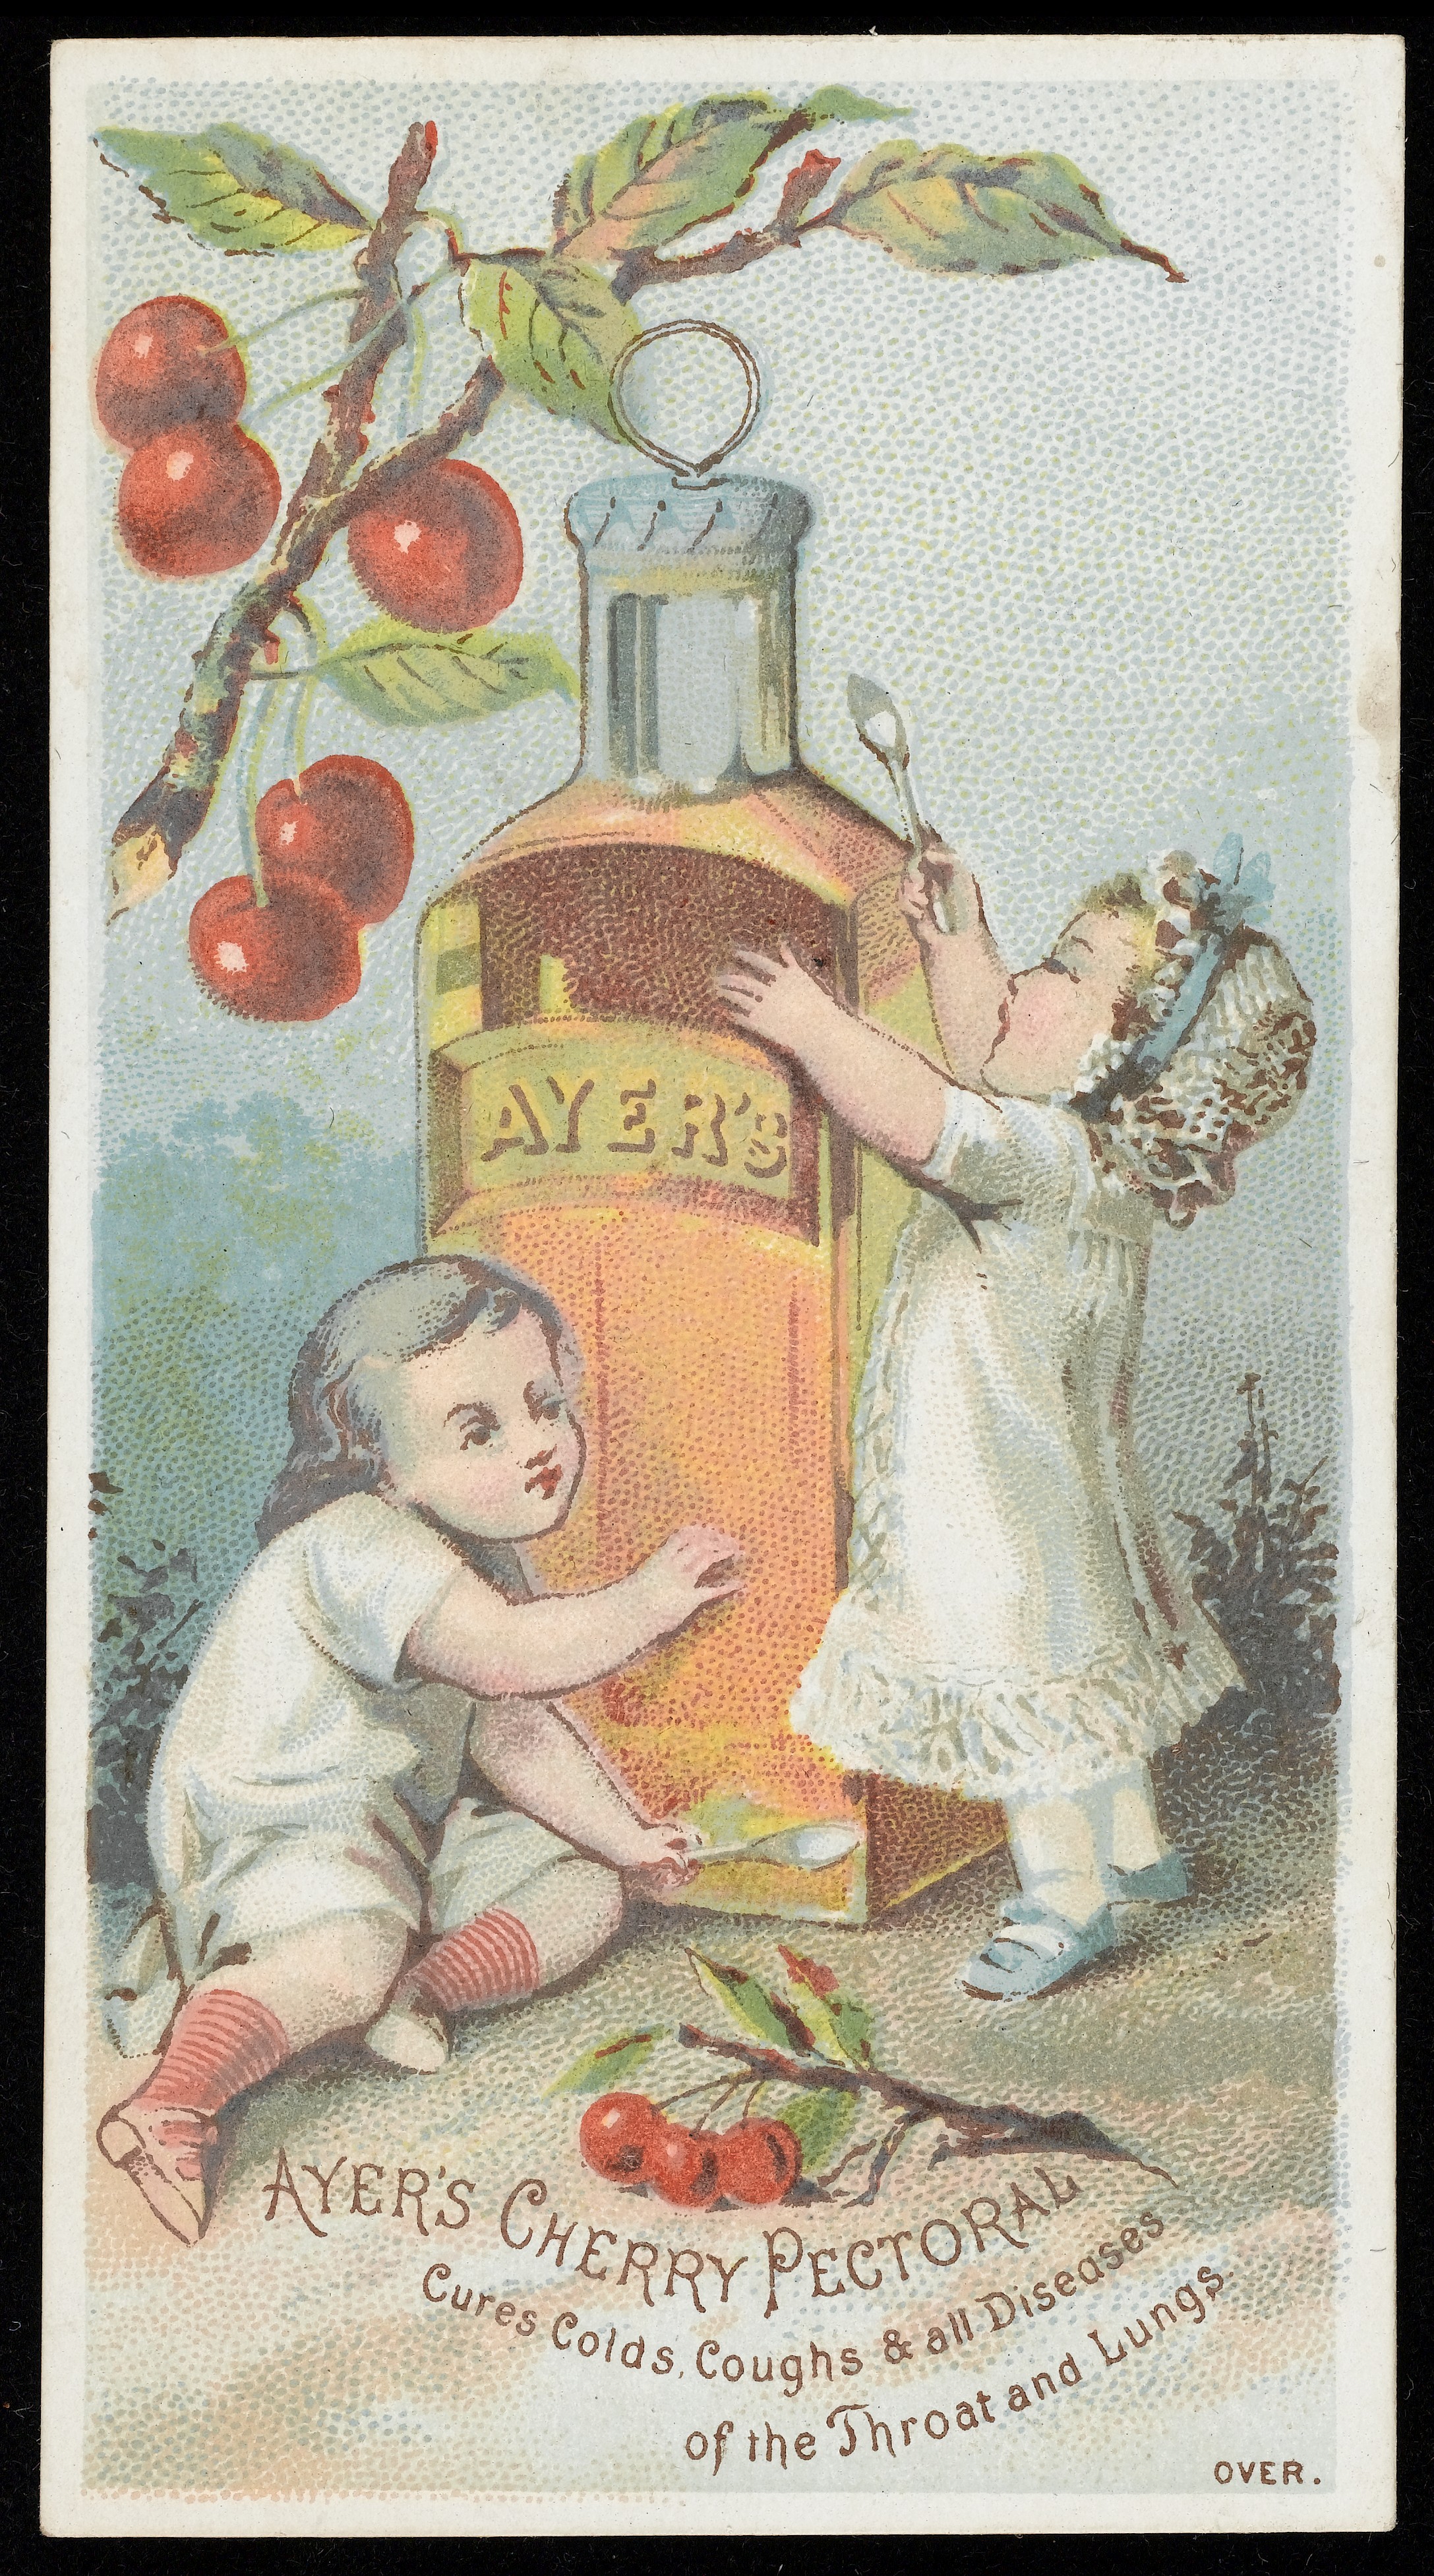 Two babies with giant bottle of Ayers Cherry Pectoral Wellcome